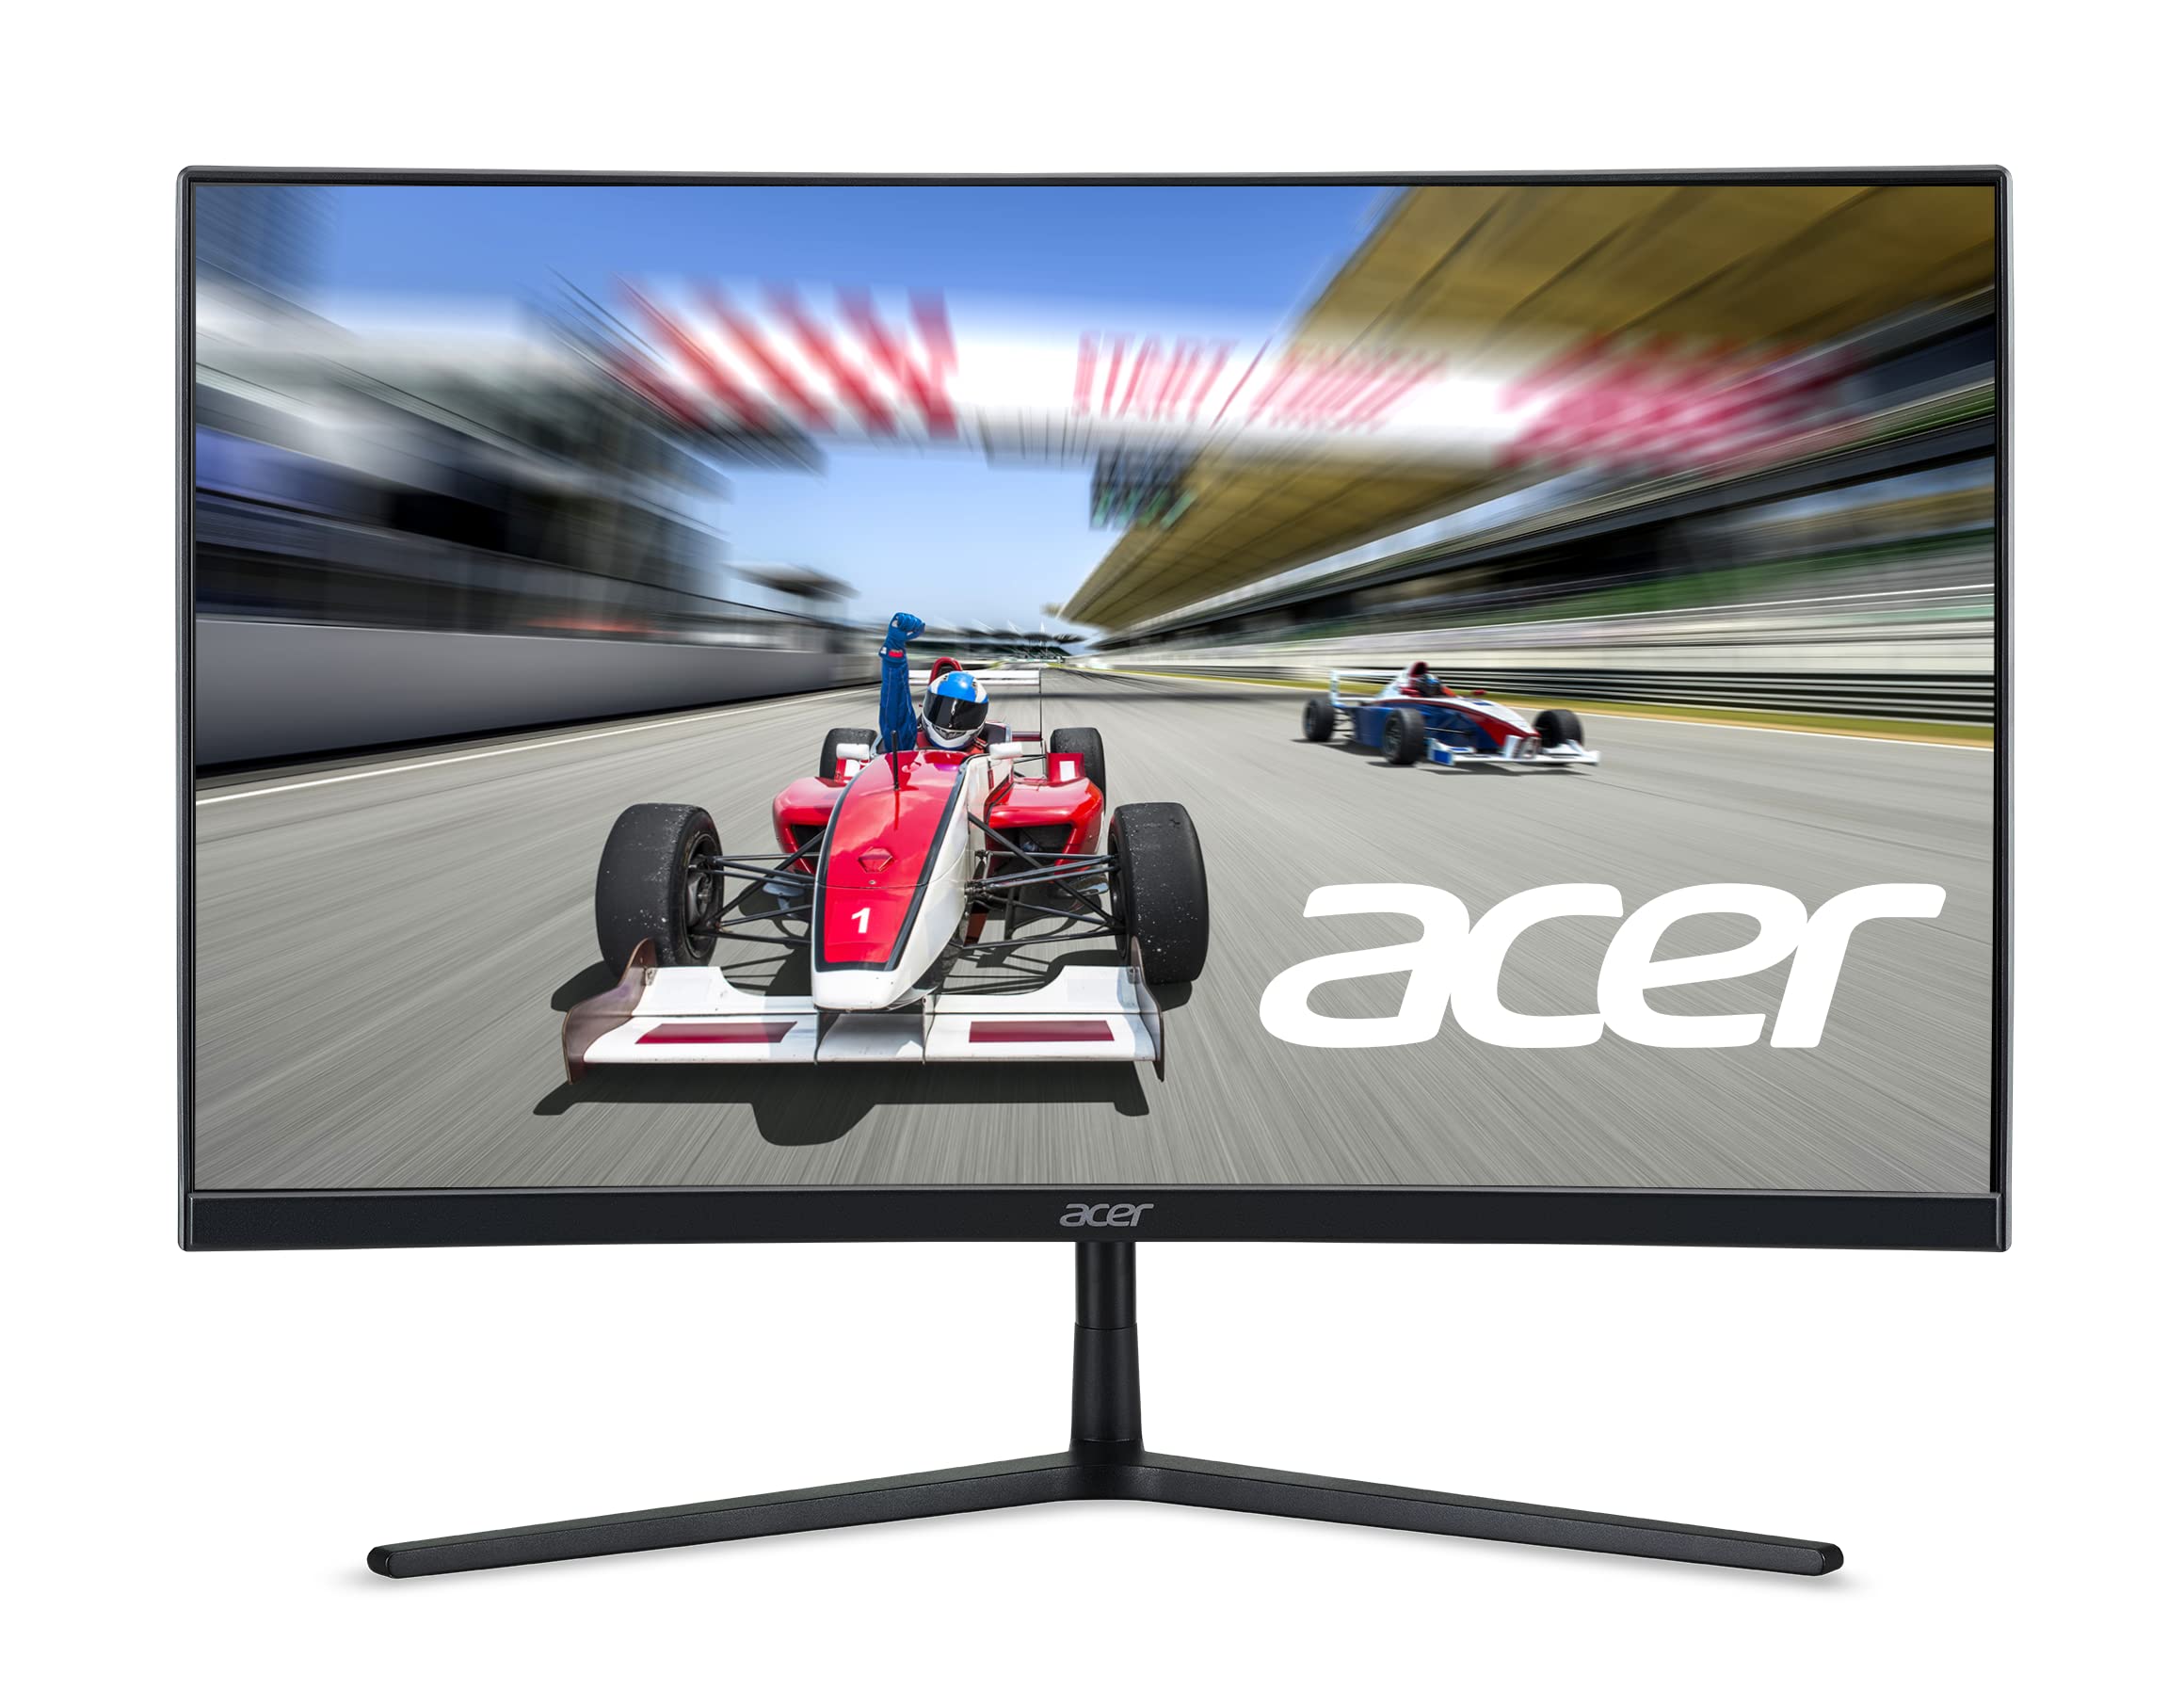  Acer EI491CUR Sbmiipphx 49" 1800R 32:9 Curved DQHD (5120 x 1440) Zero-Frame Gaming Monitor | AMD FreeSync Premium | Up to 120Hz | 4ms | 94% DCI-P3 | 2 x Display Port v1.4, 2 x HDMI 2.0 & 1 x...